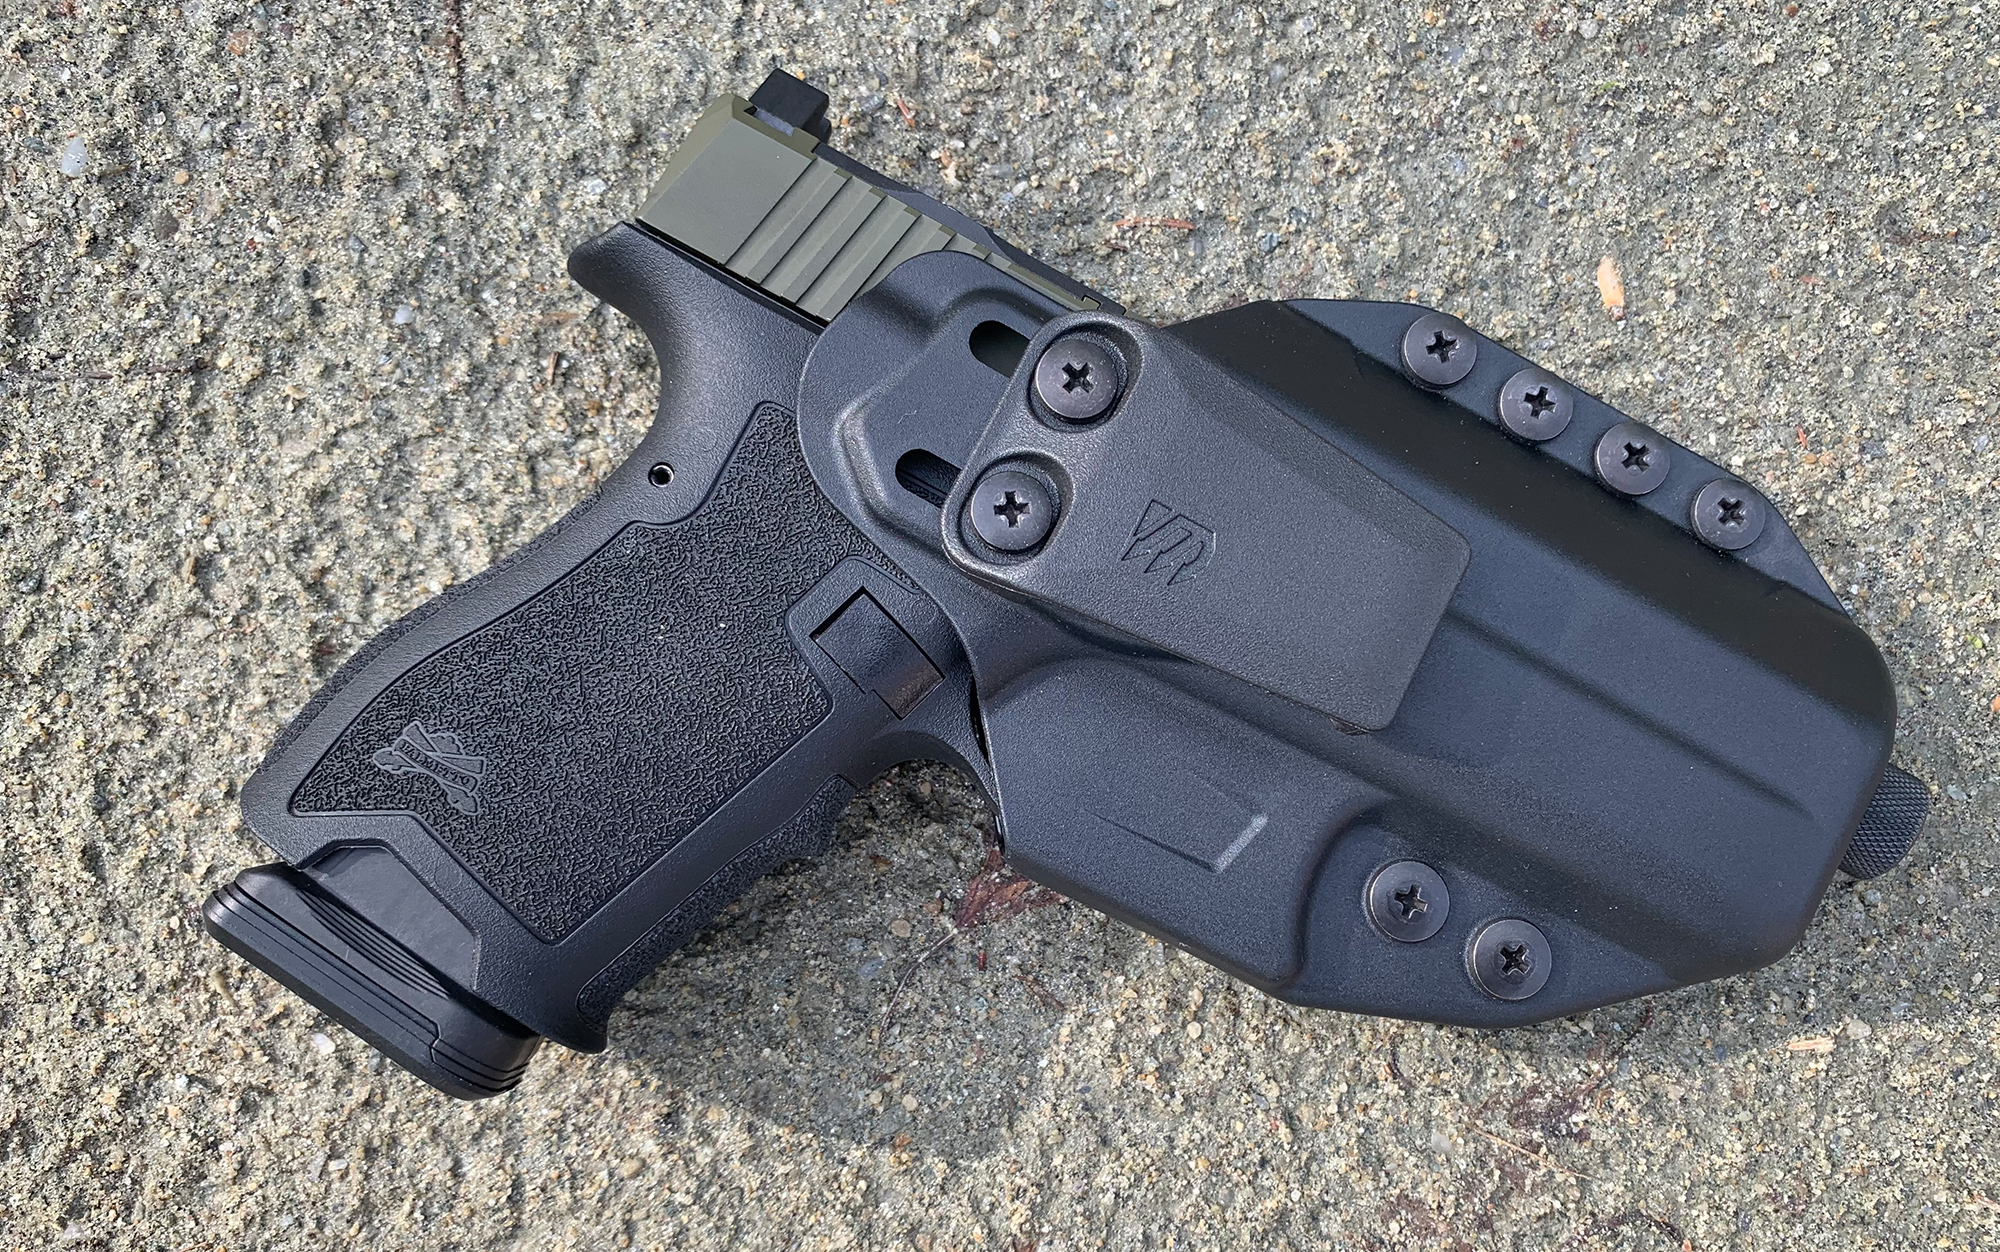 The Blackhawk Stache IWB is one of the best Glock holsters.